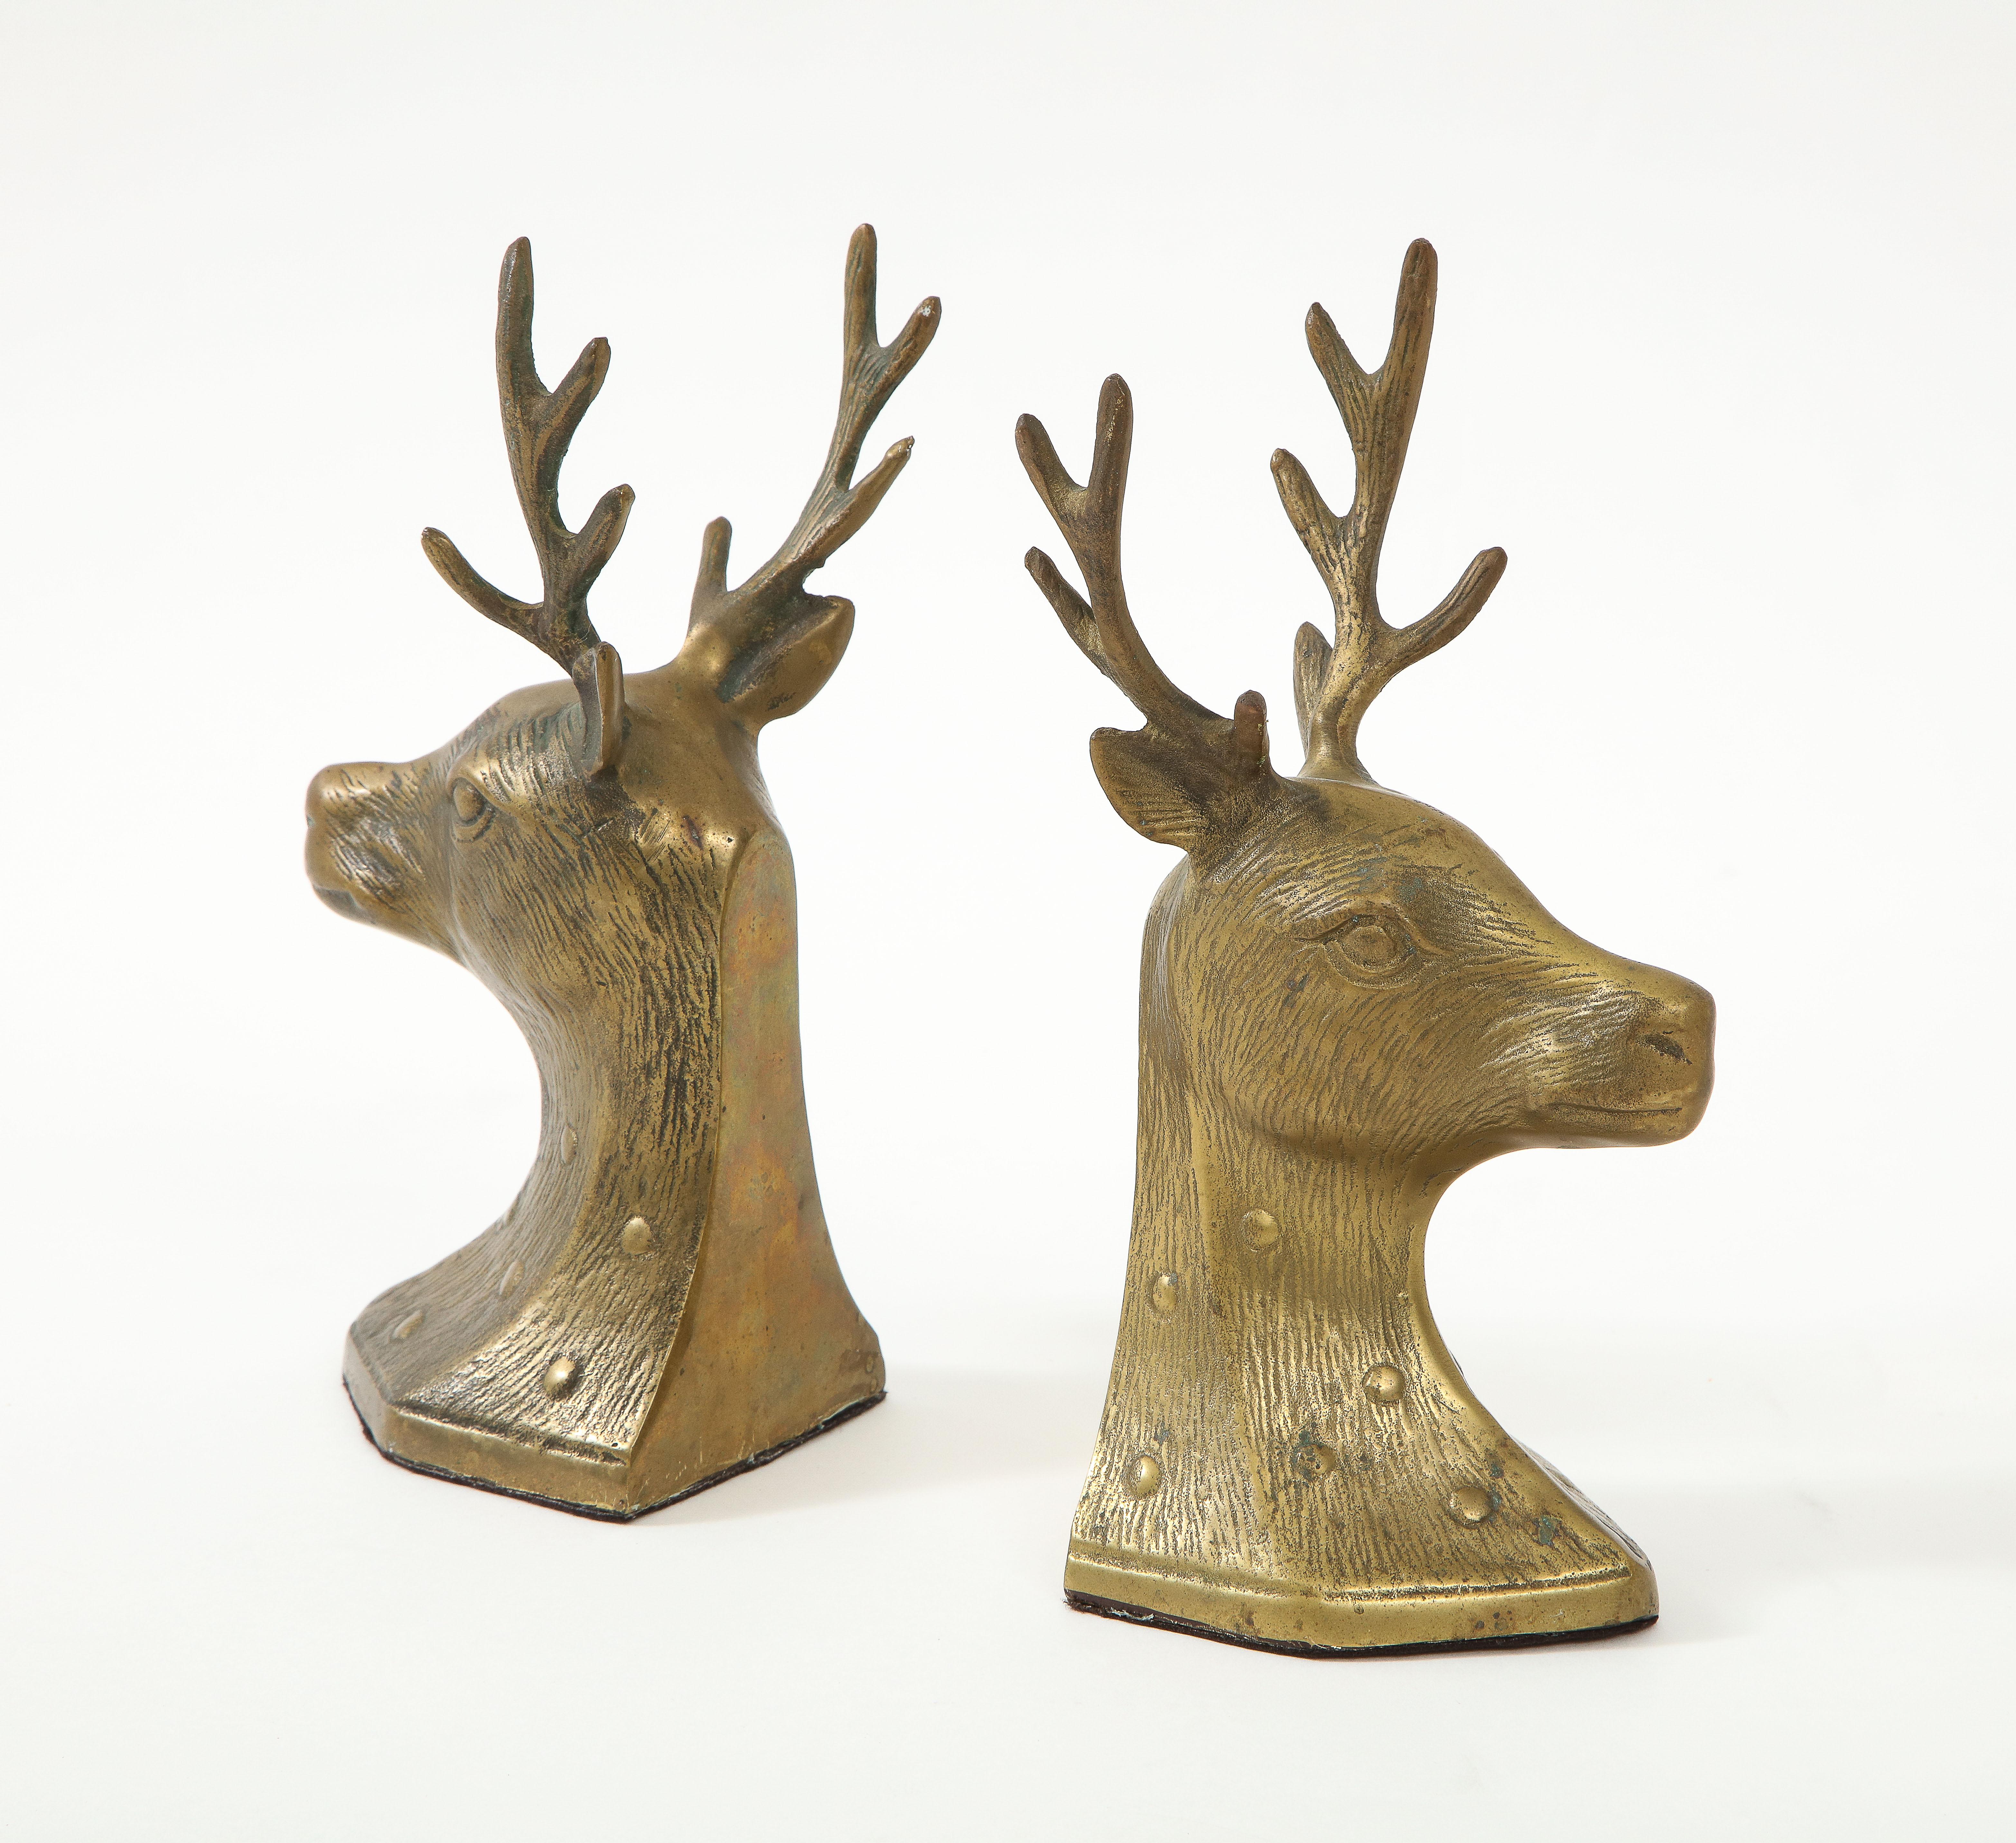 Set of cast Bronze stylized deer bookends with detailed antlers and coat.